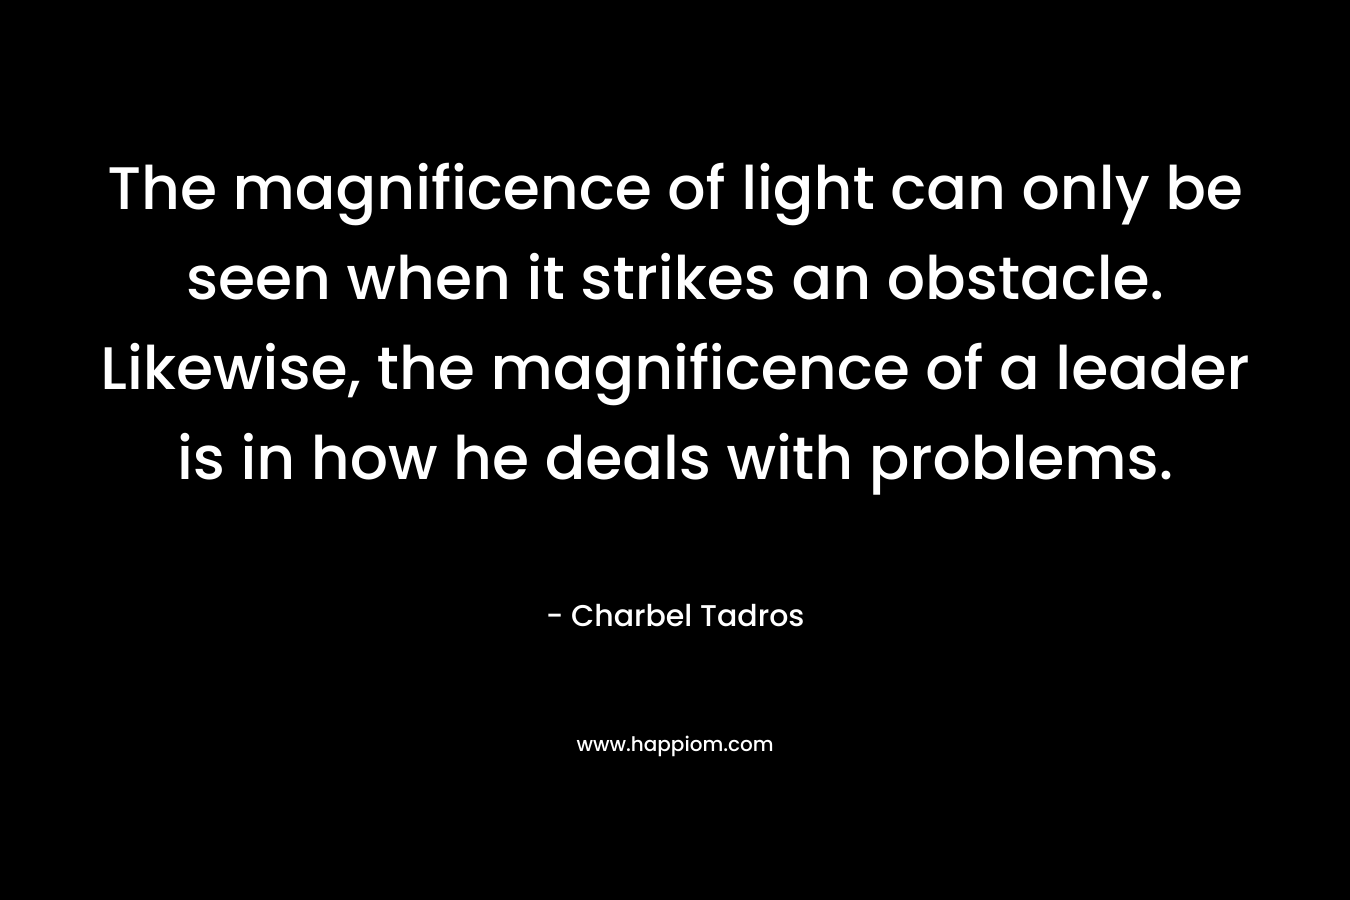 The magnificence of light can only be seen when it strikes an obstacle. Likewise, the magnificence of a leader is in how he deals with problems.